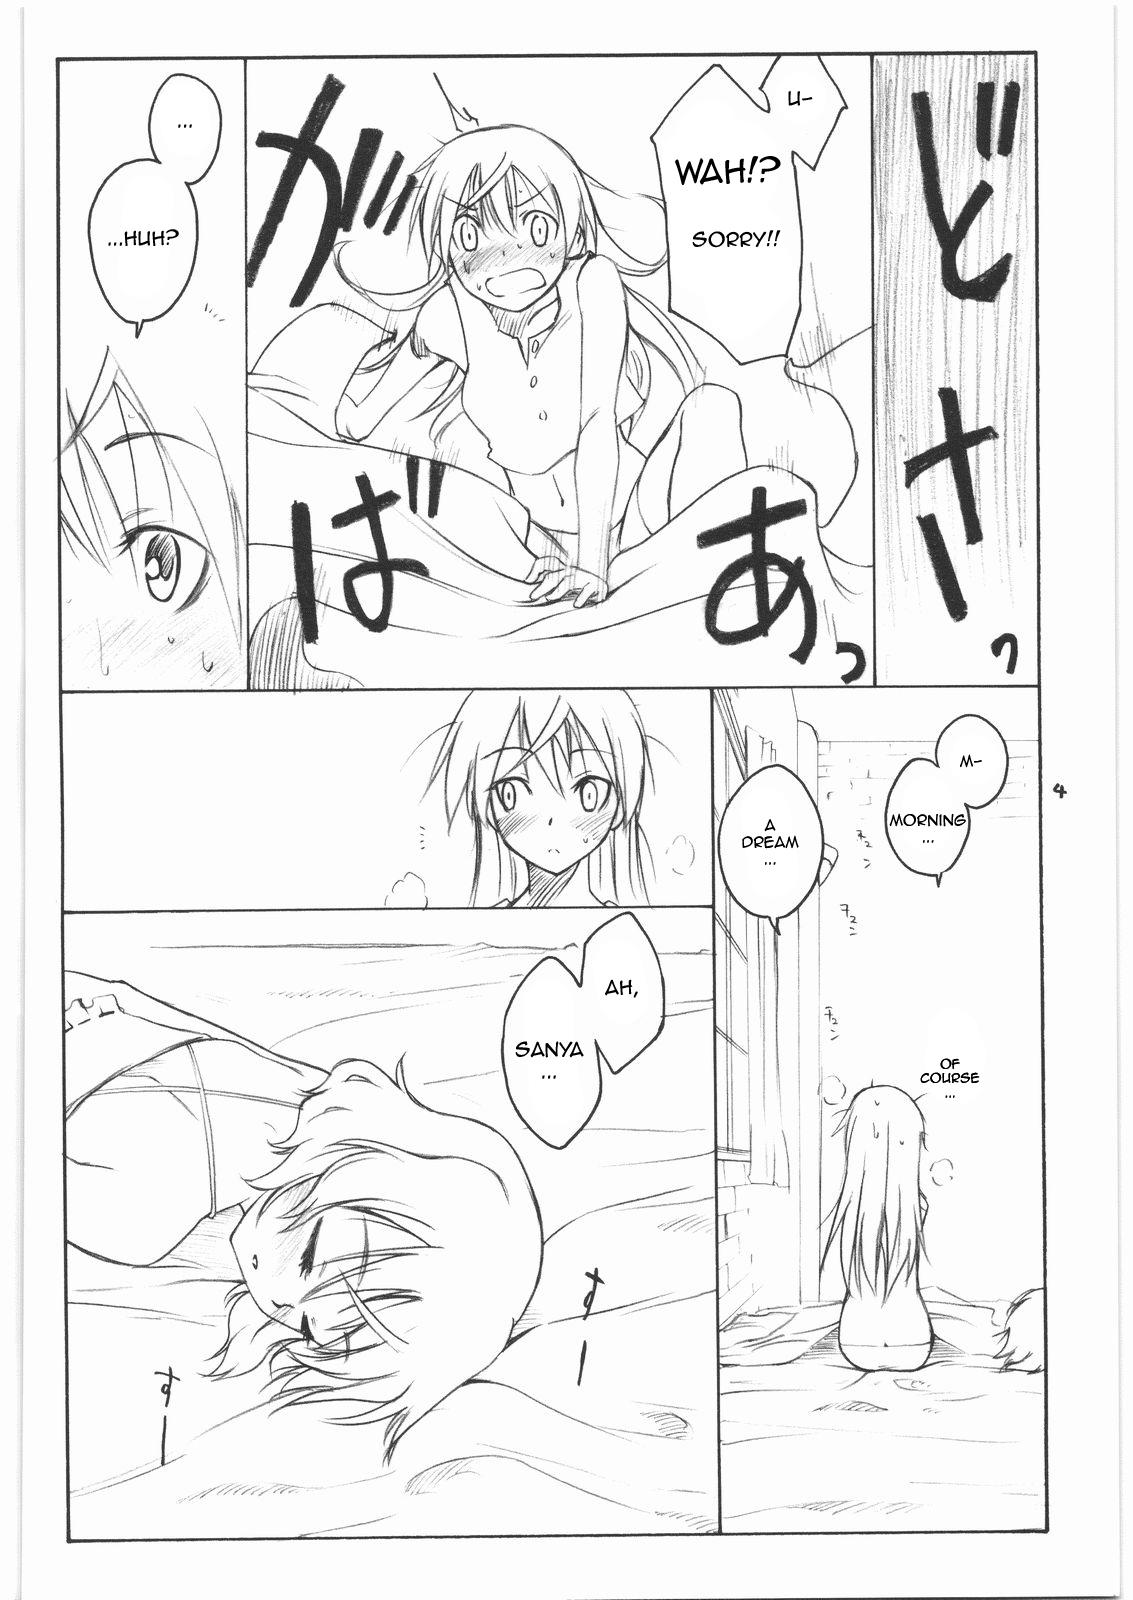 Scene shy - Strike witches The - Page 3